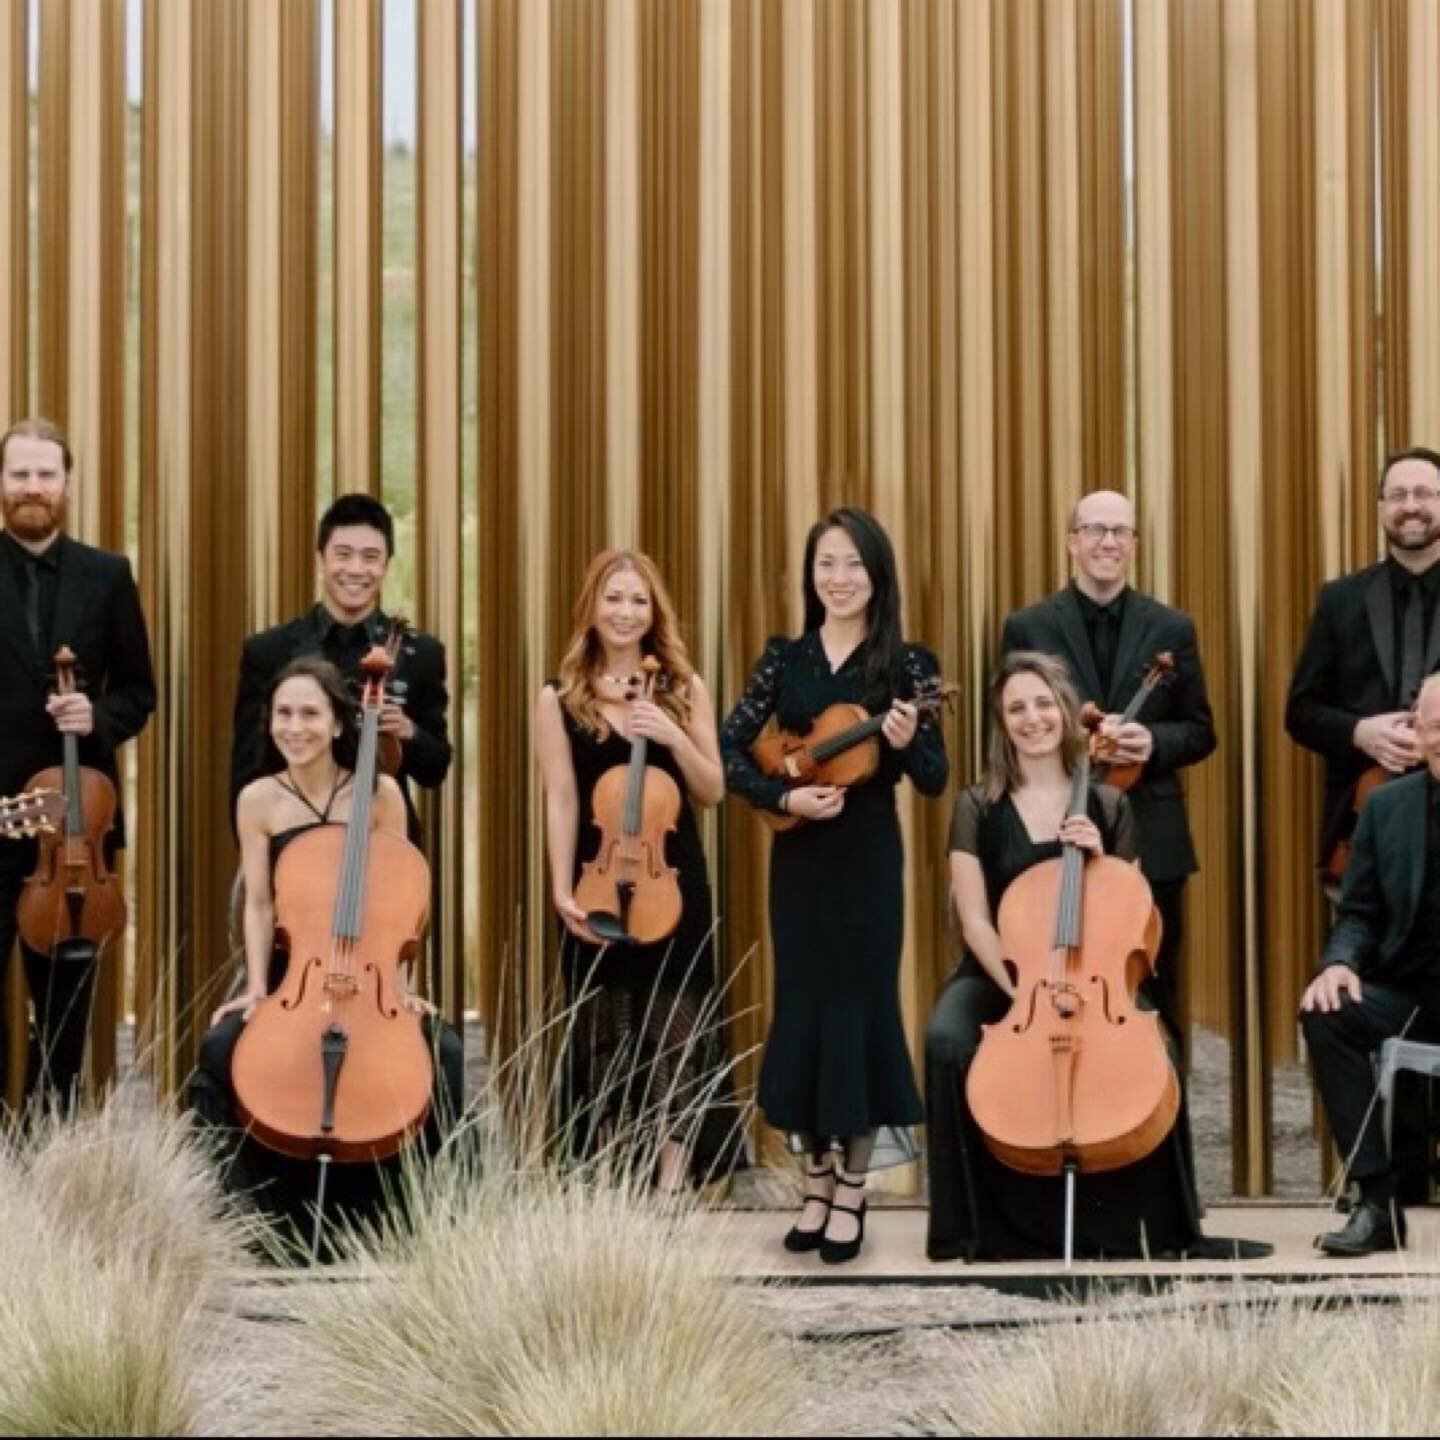 From our team to you: Cheers to a year of growth and triumphs! Happy New Year! 🥂
.
.

#happynewyear #guitar #violin #viola #cello #musicians #2024 #nye #wedding #napavalley #sf